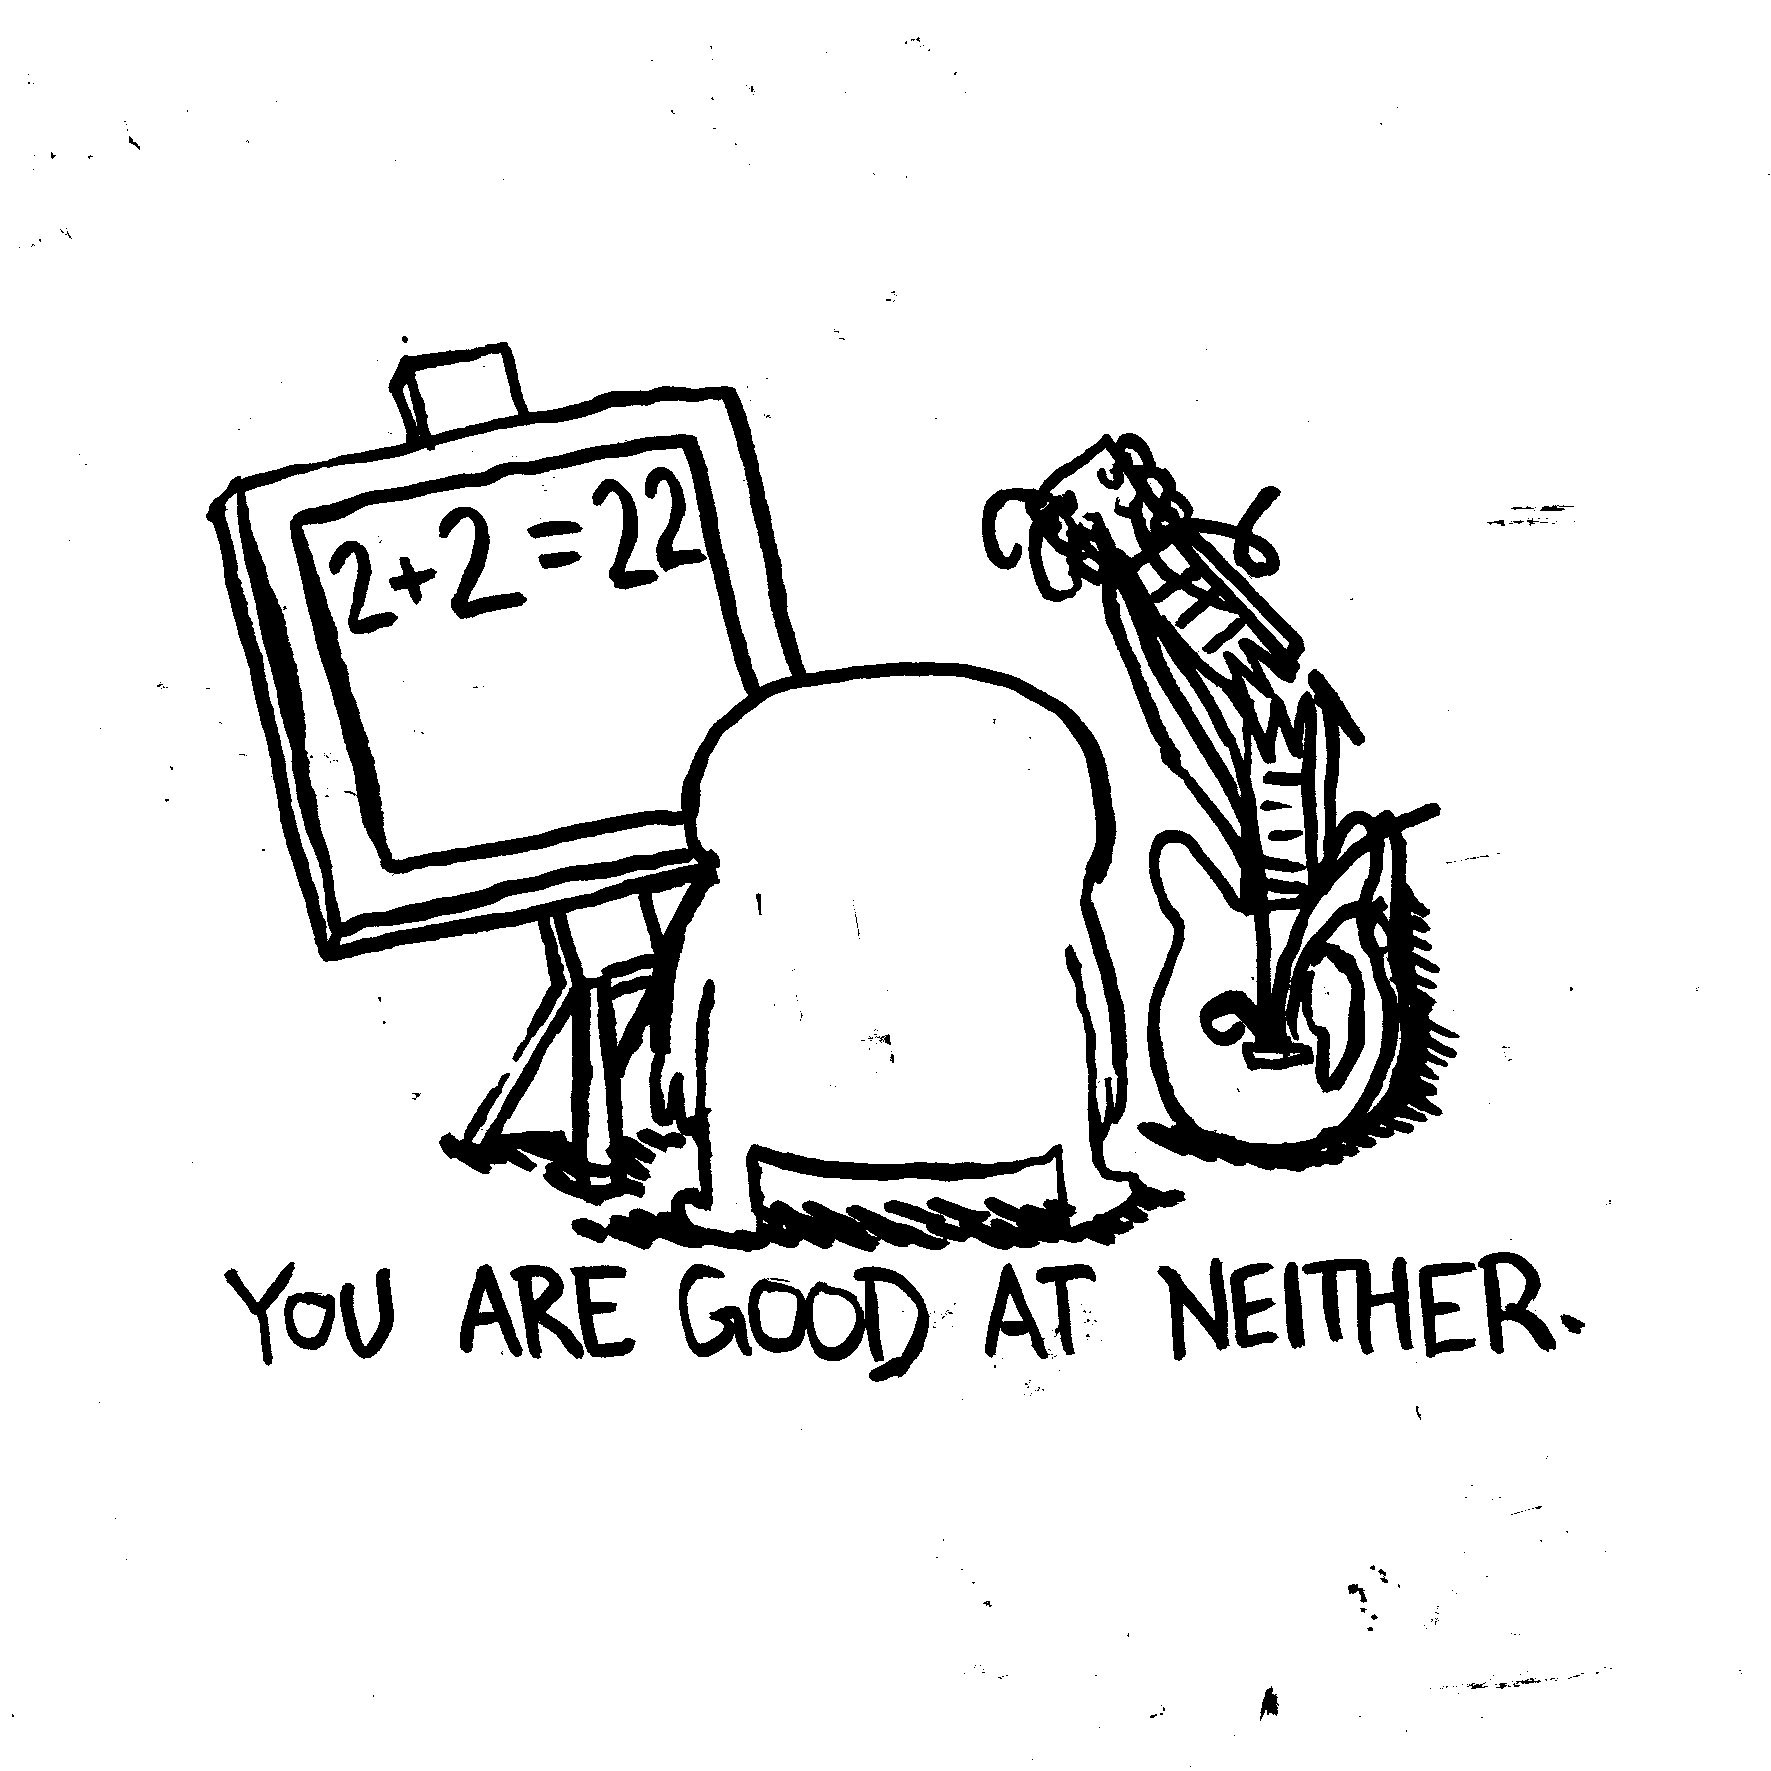 You are good at neither.